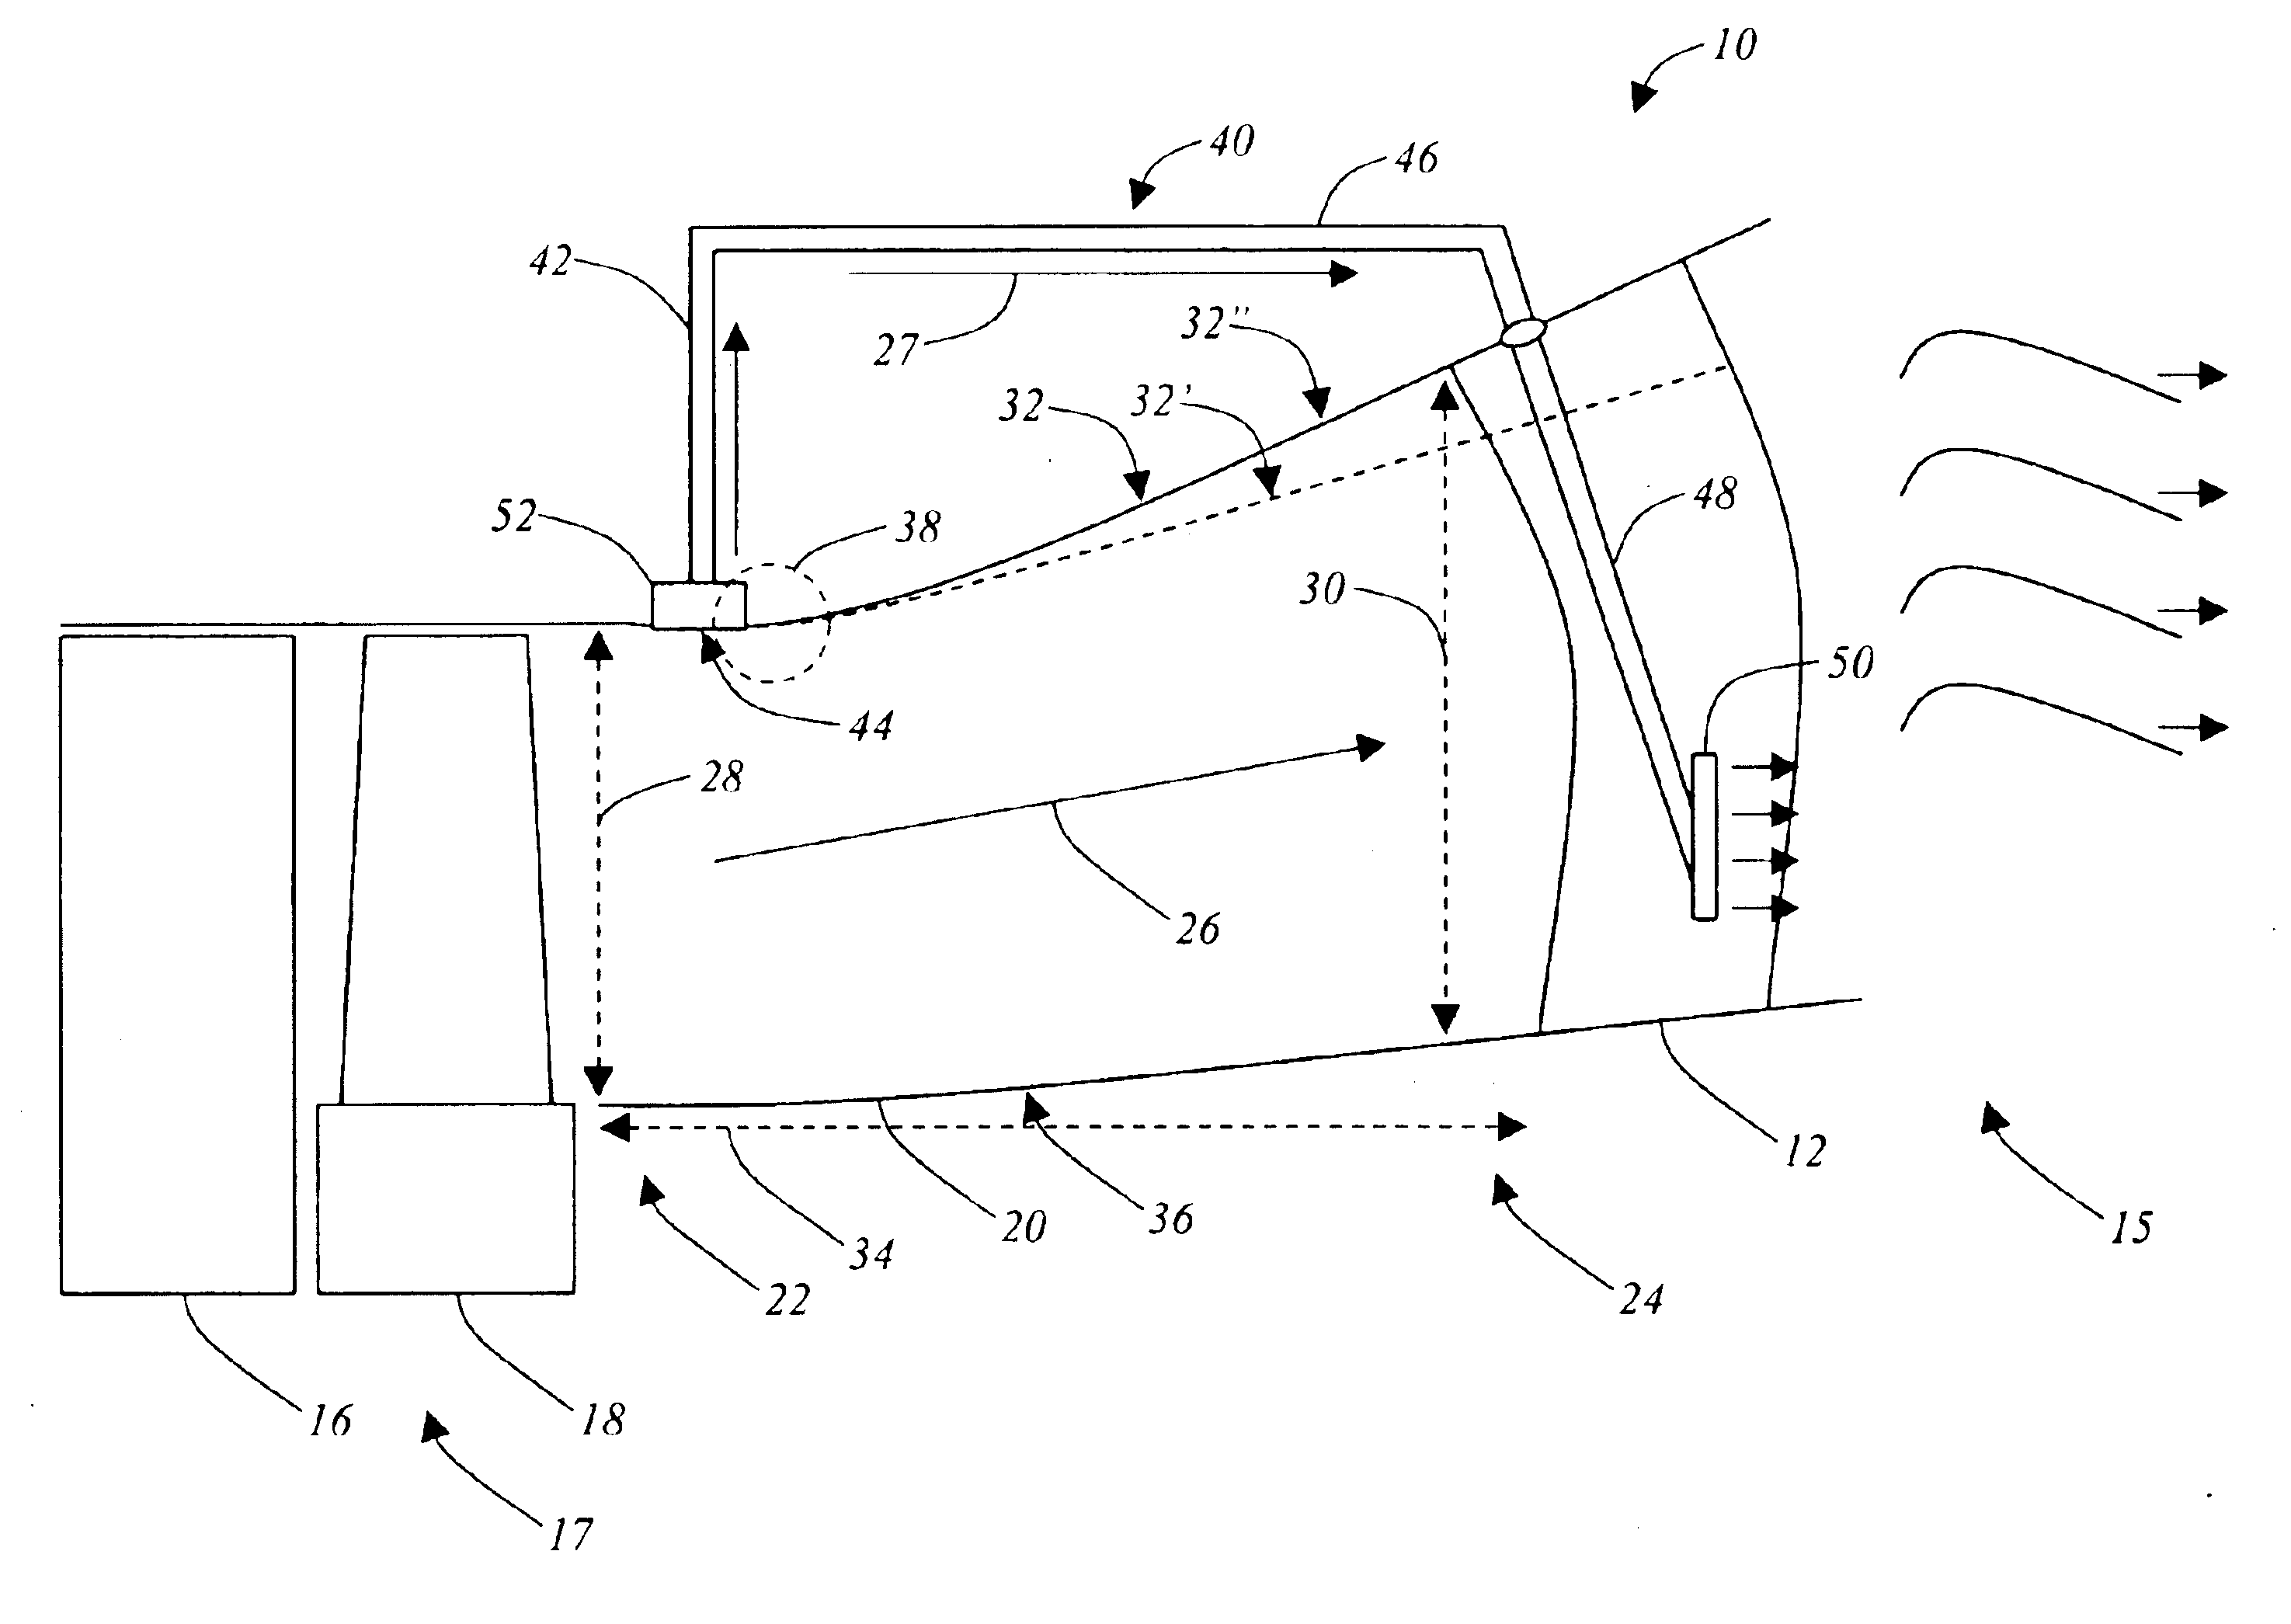 Self-aspirating high-area-ratio inter-turbine duct assembly for use in a gas turbine engine